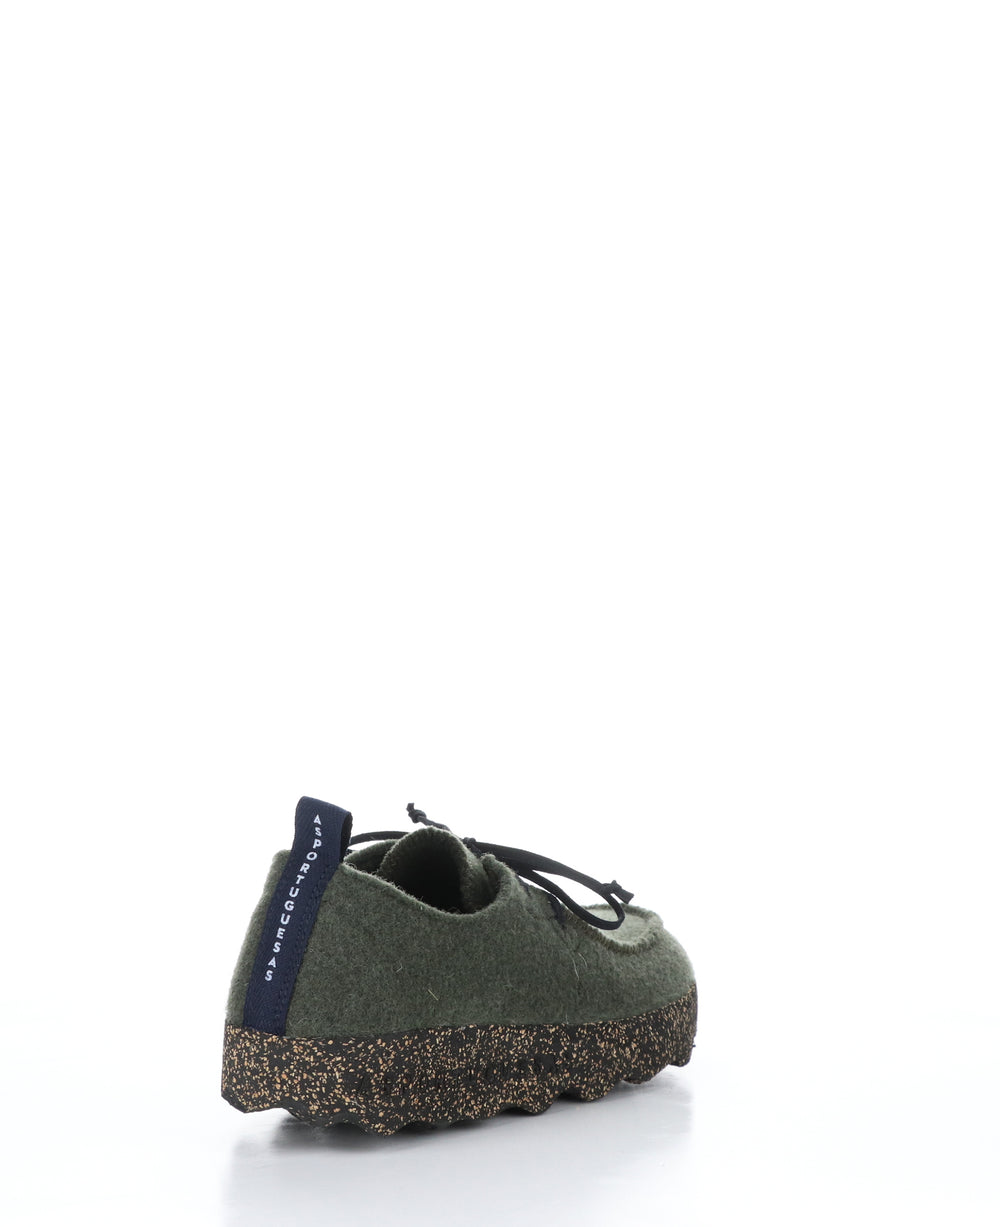 CHAT060ASPM Military Green Round Toe Shoes|CHAT060ASPM Chaussures à Bout Rond in Vert